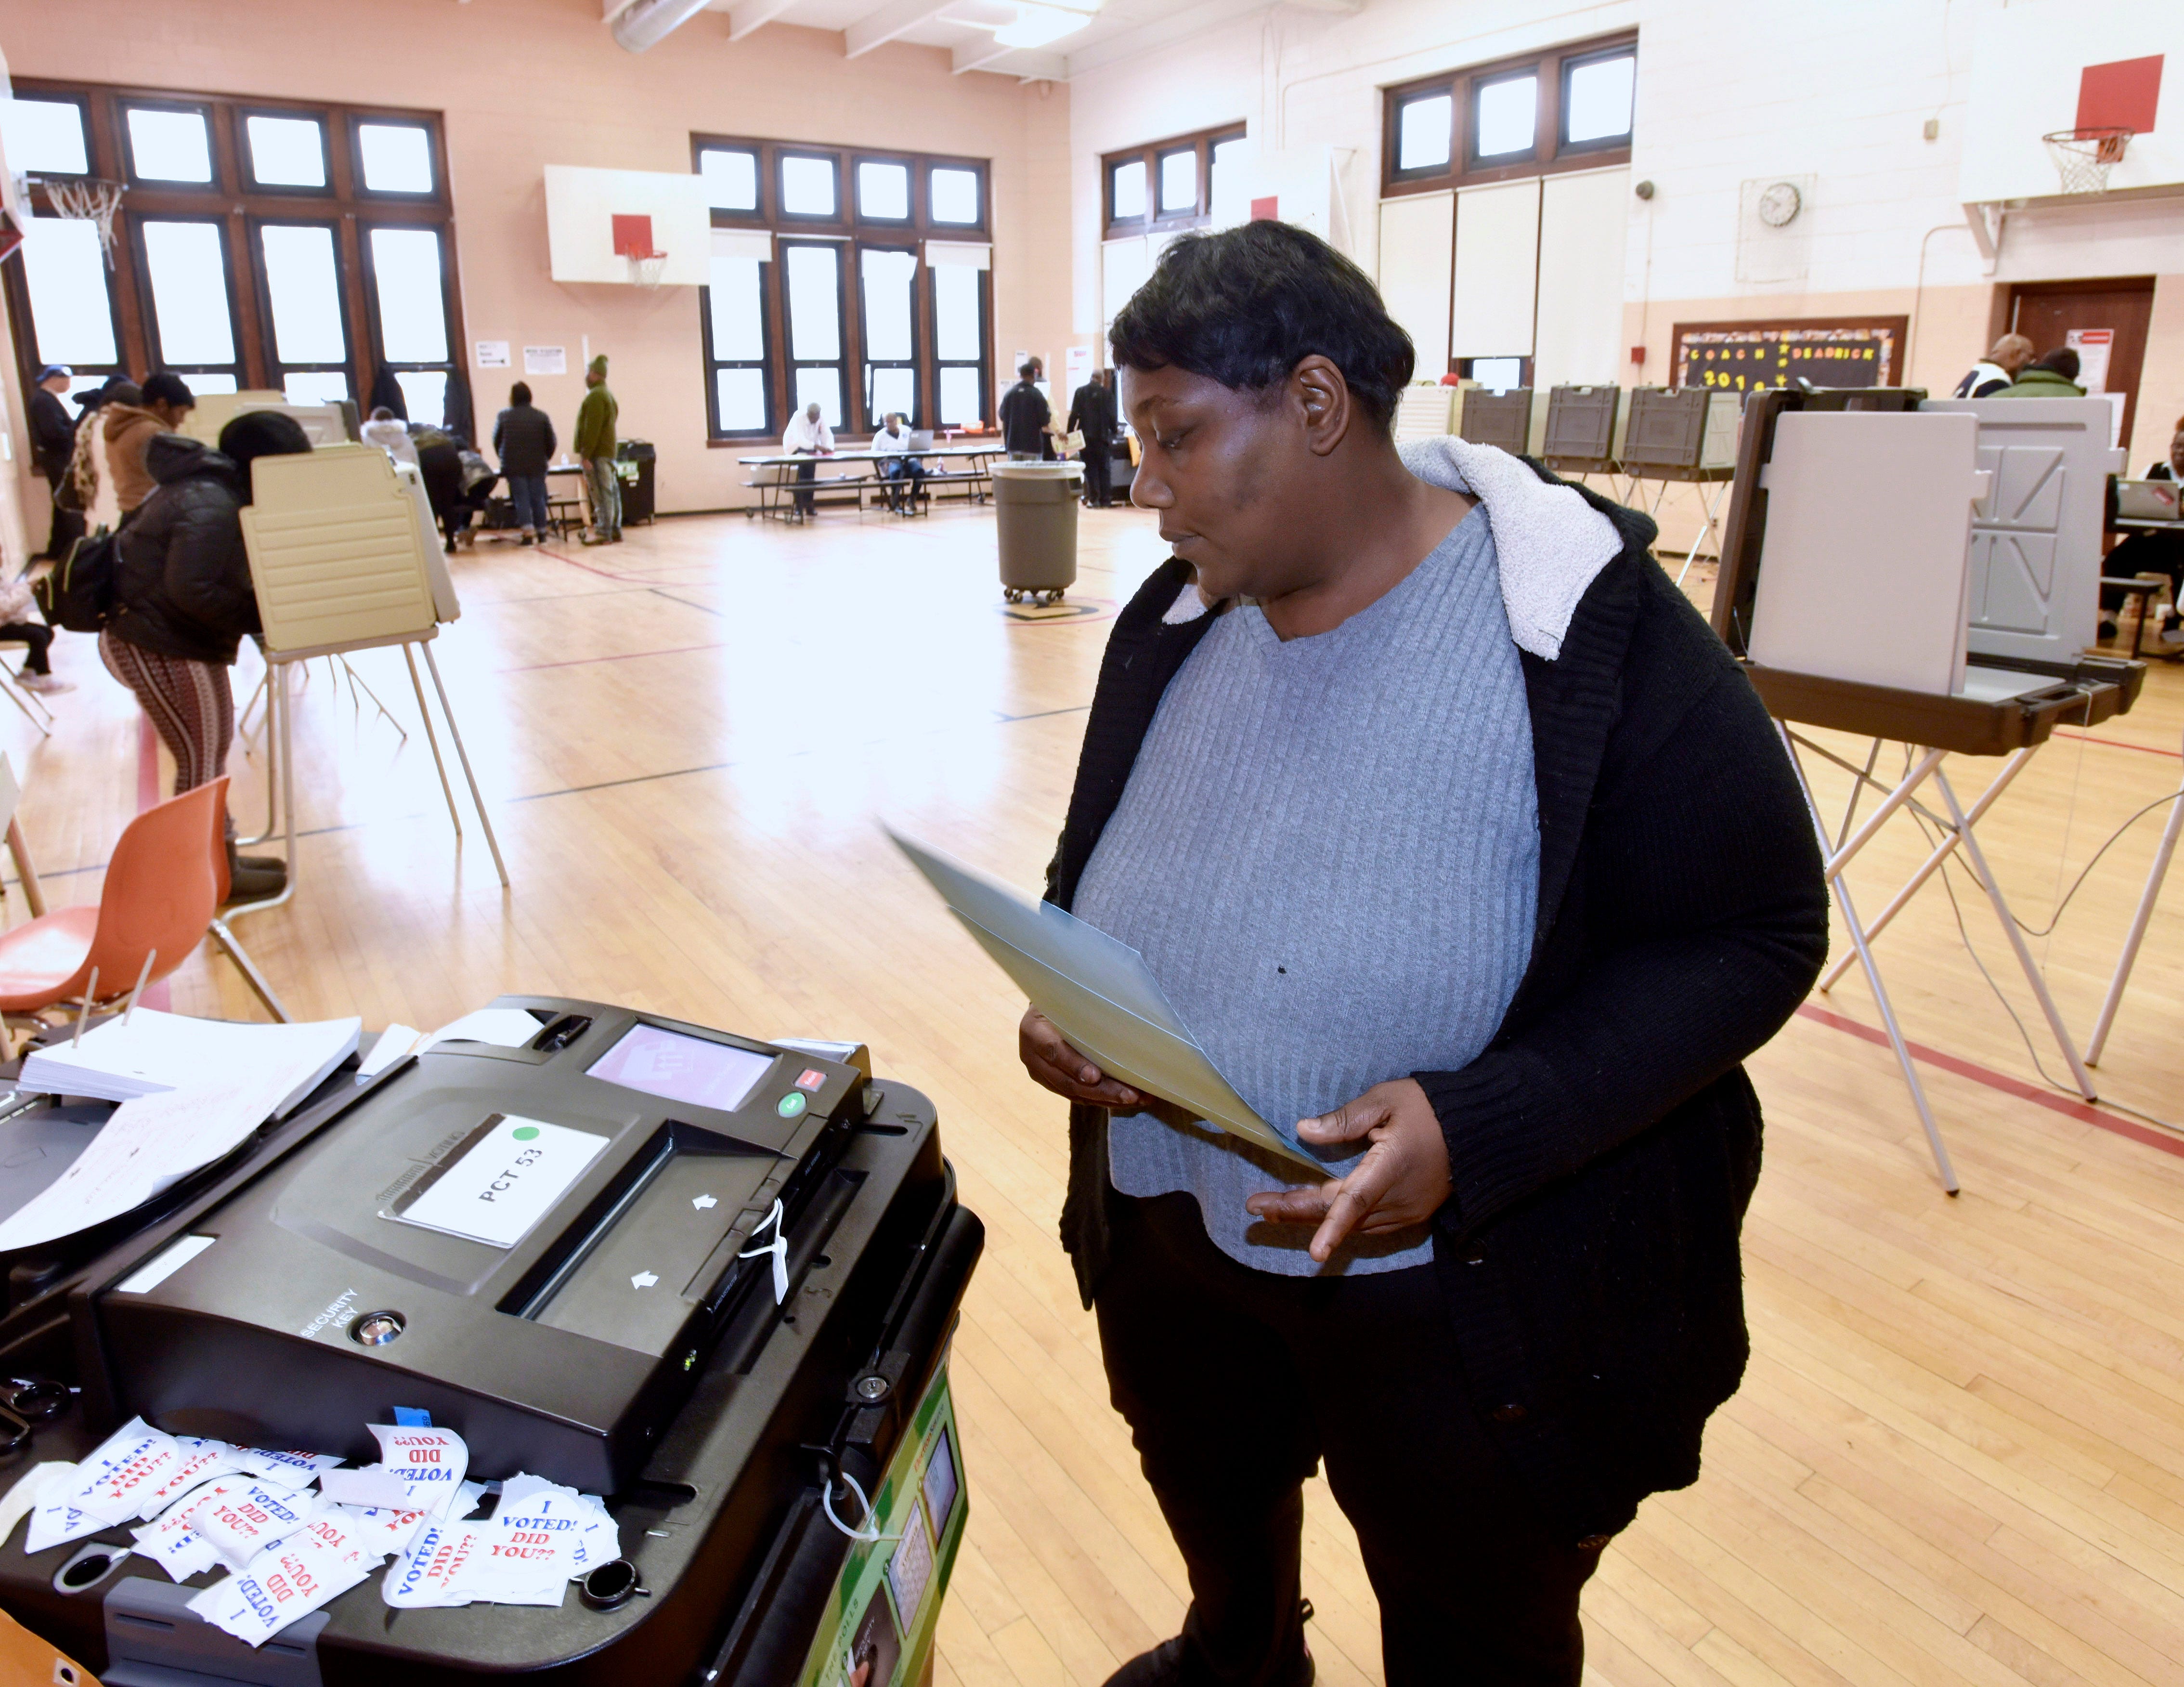 Charmiria Ashford of Detroit casts her ballot in the gym at Brewer Elementary School Tuesday afternoon in Detroit.